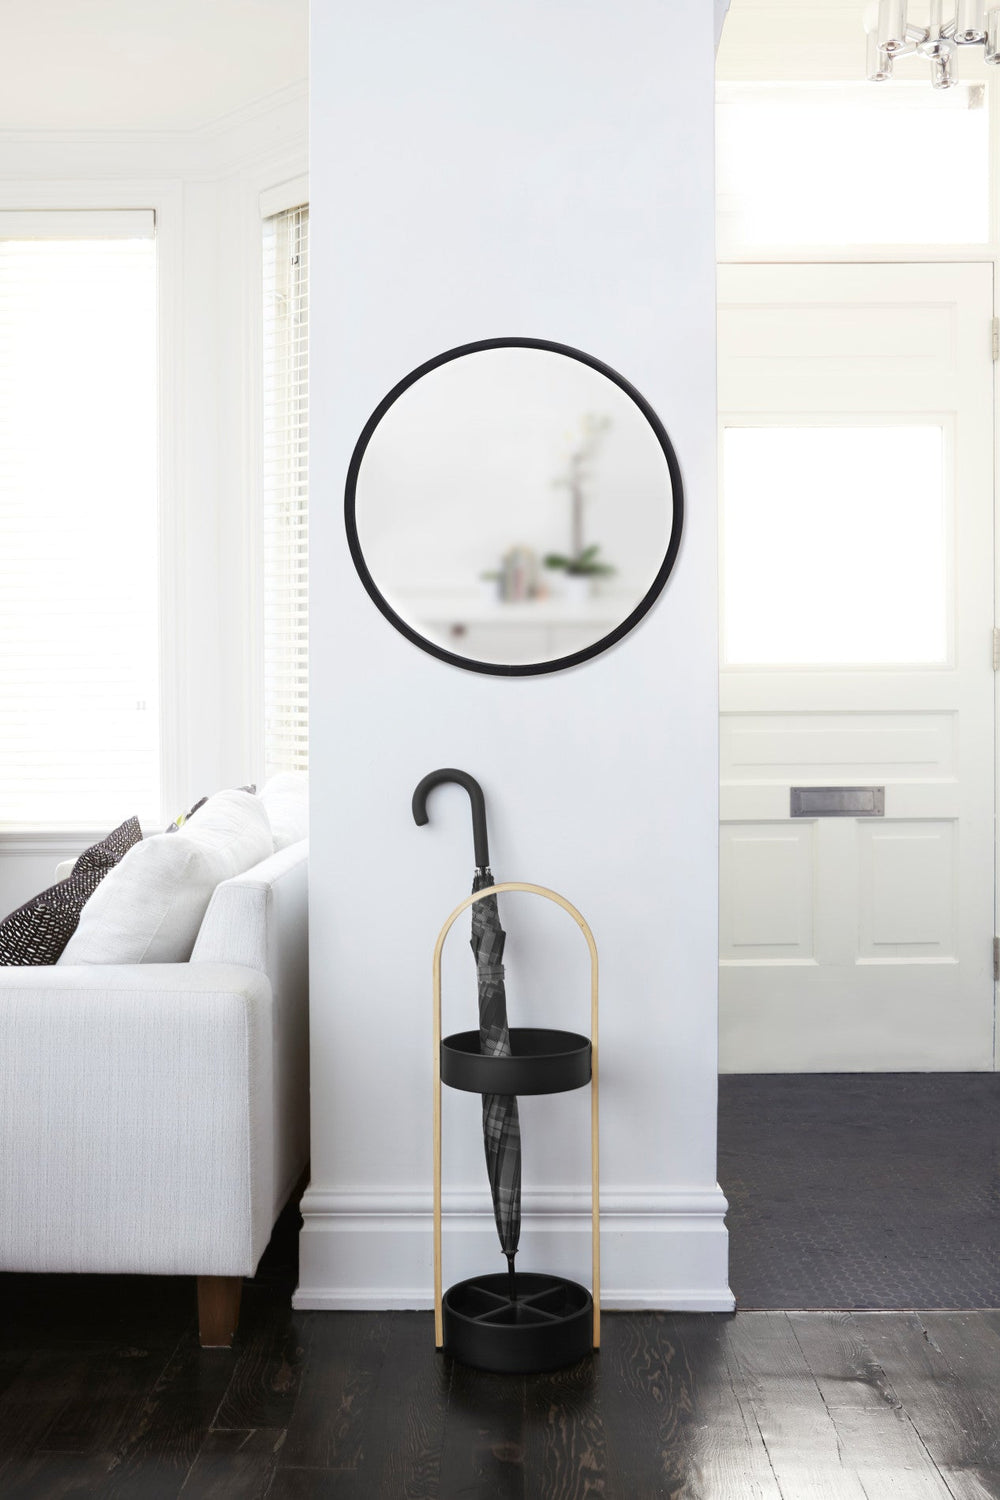 Wall Mirrors | color: Black | size: 24"""" (61 cm) | Hover